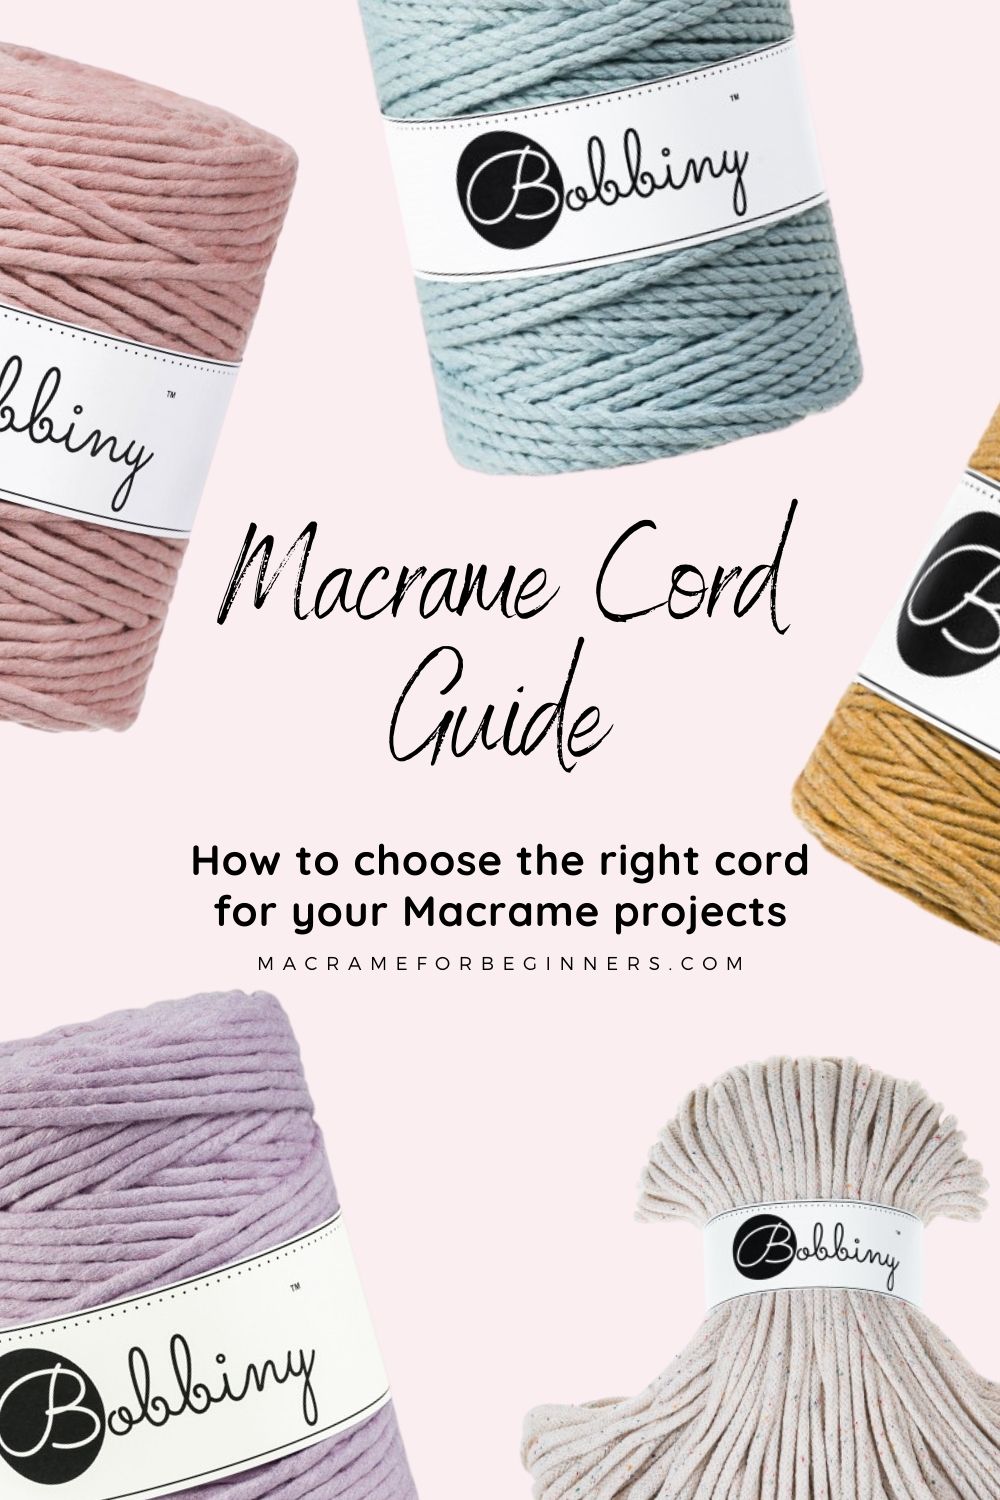 Macrame Cord Guide - Macrame Basics – Choosing the Right Macrame Cords for Your Project - Macrame for Beginners